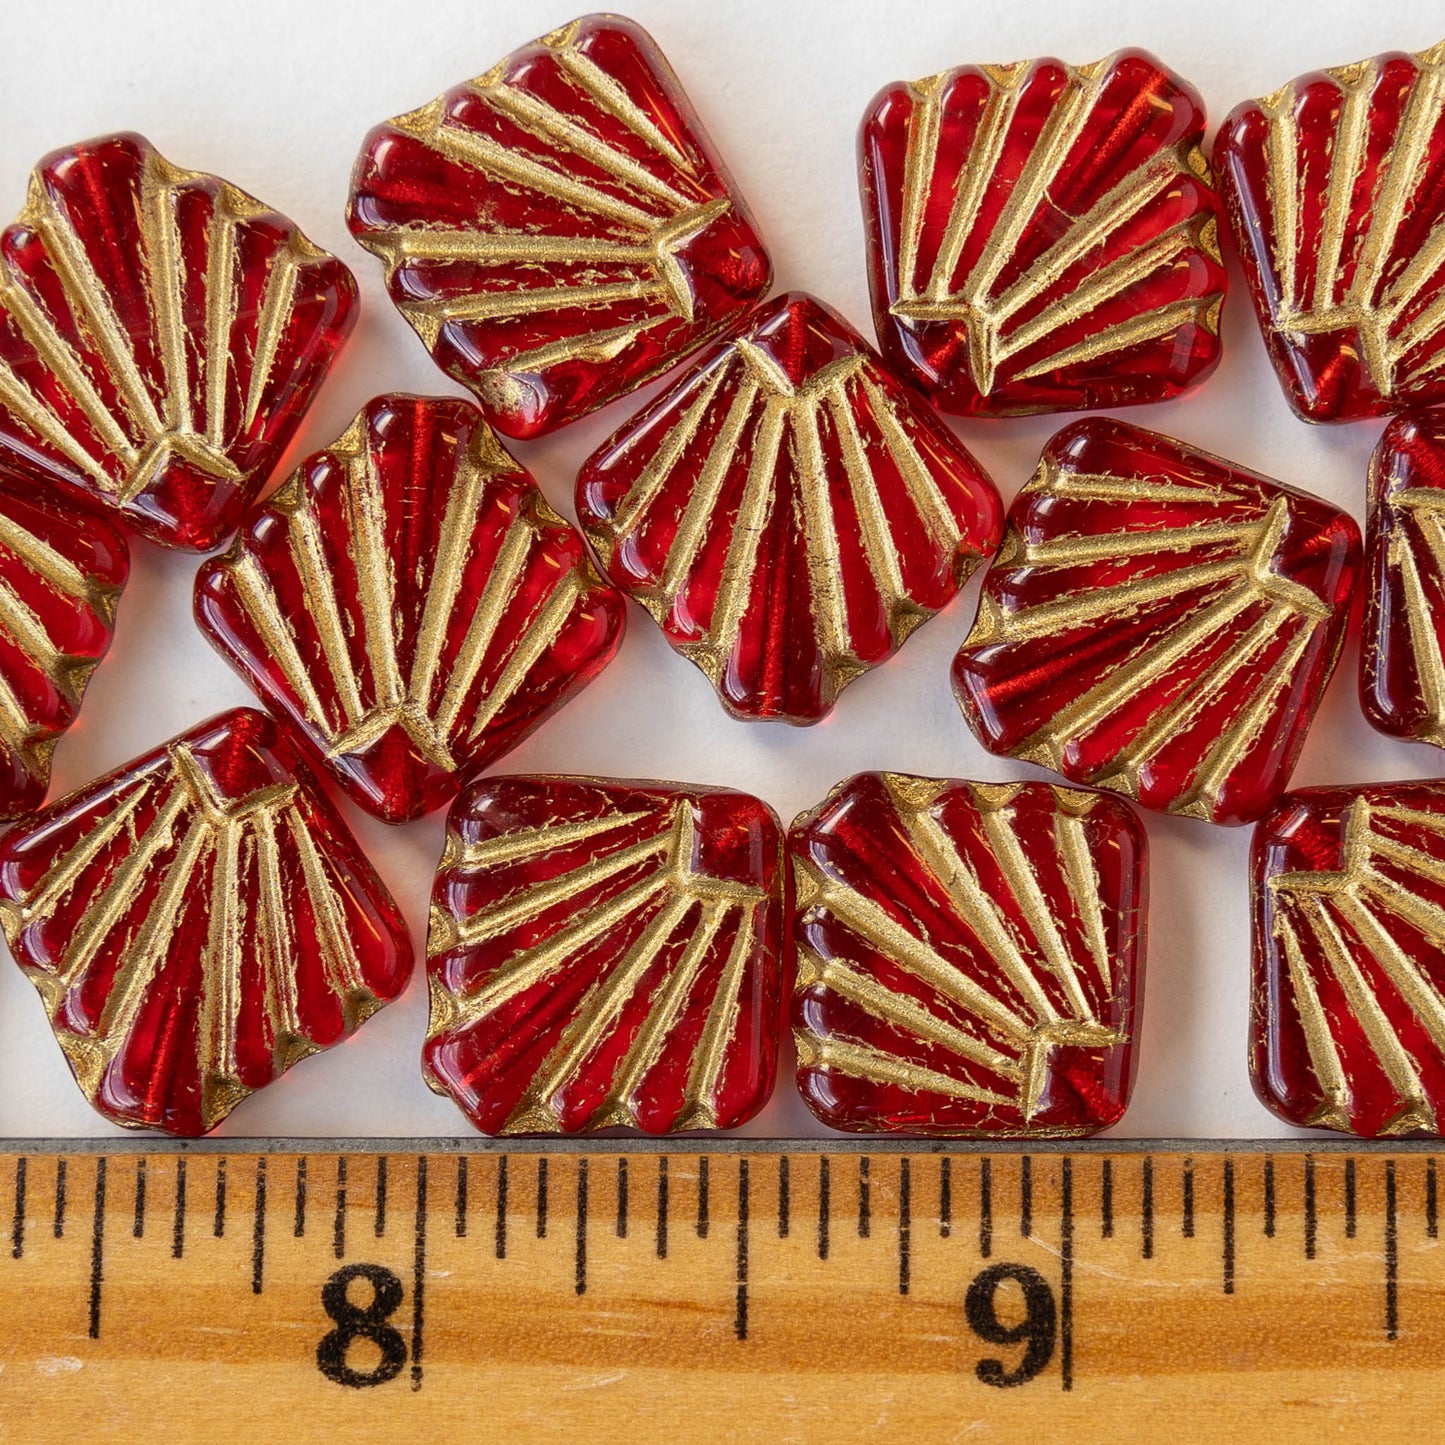 14mm Diafan Beads - Red with Gold Wash - 8 beads